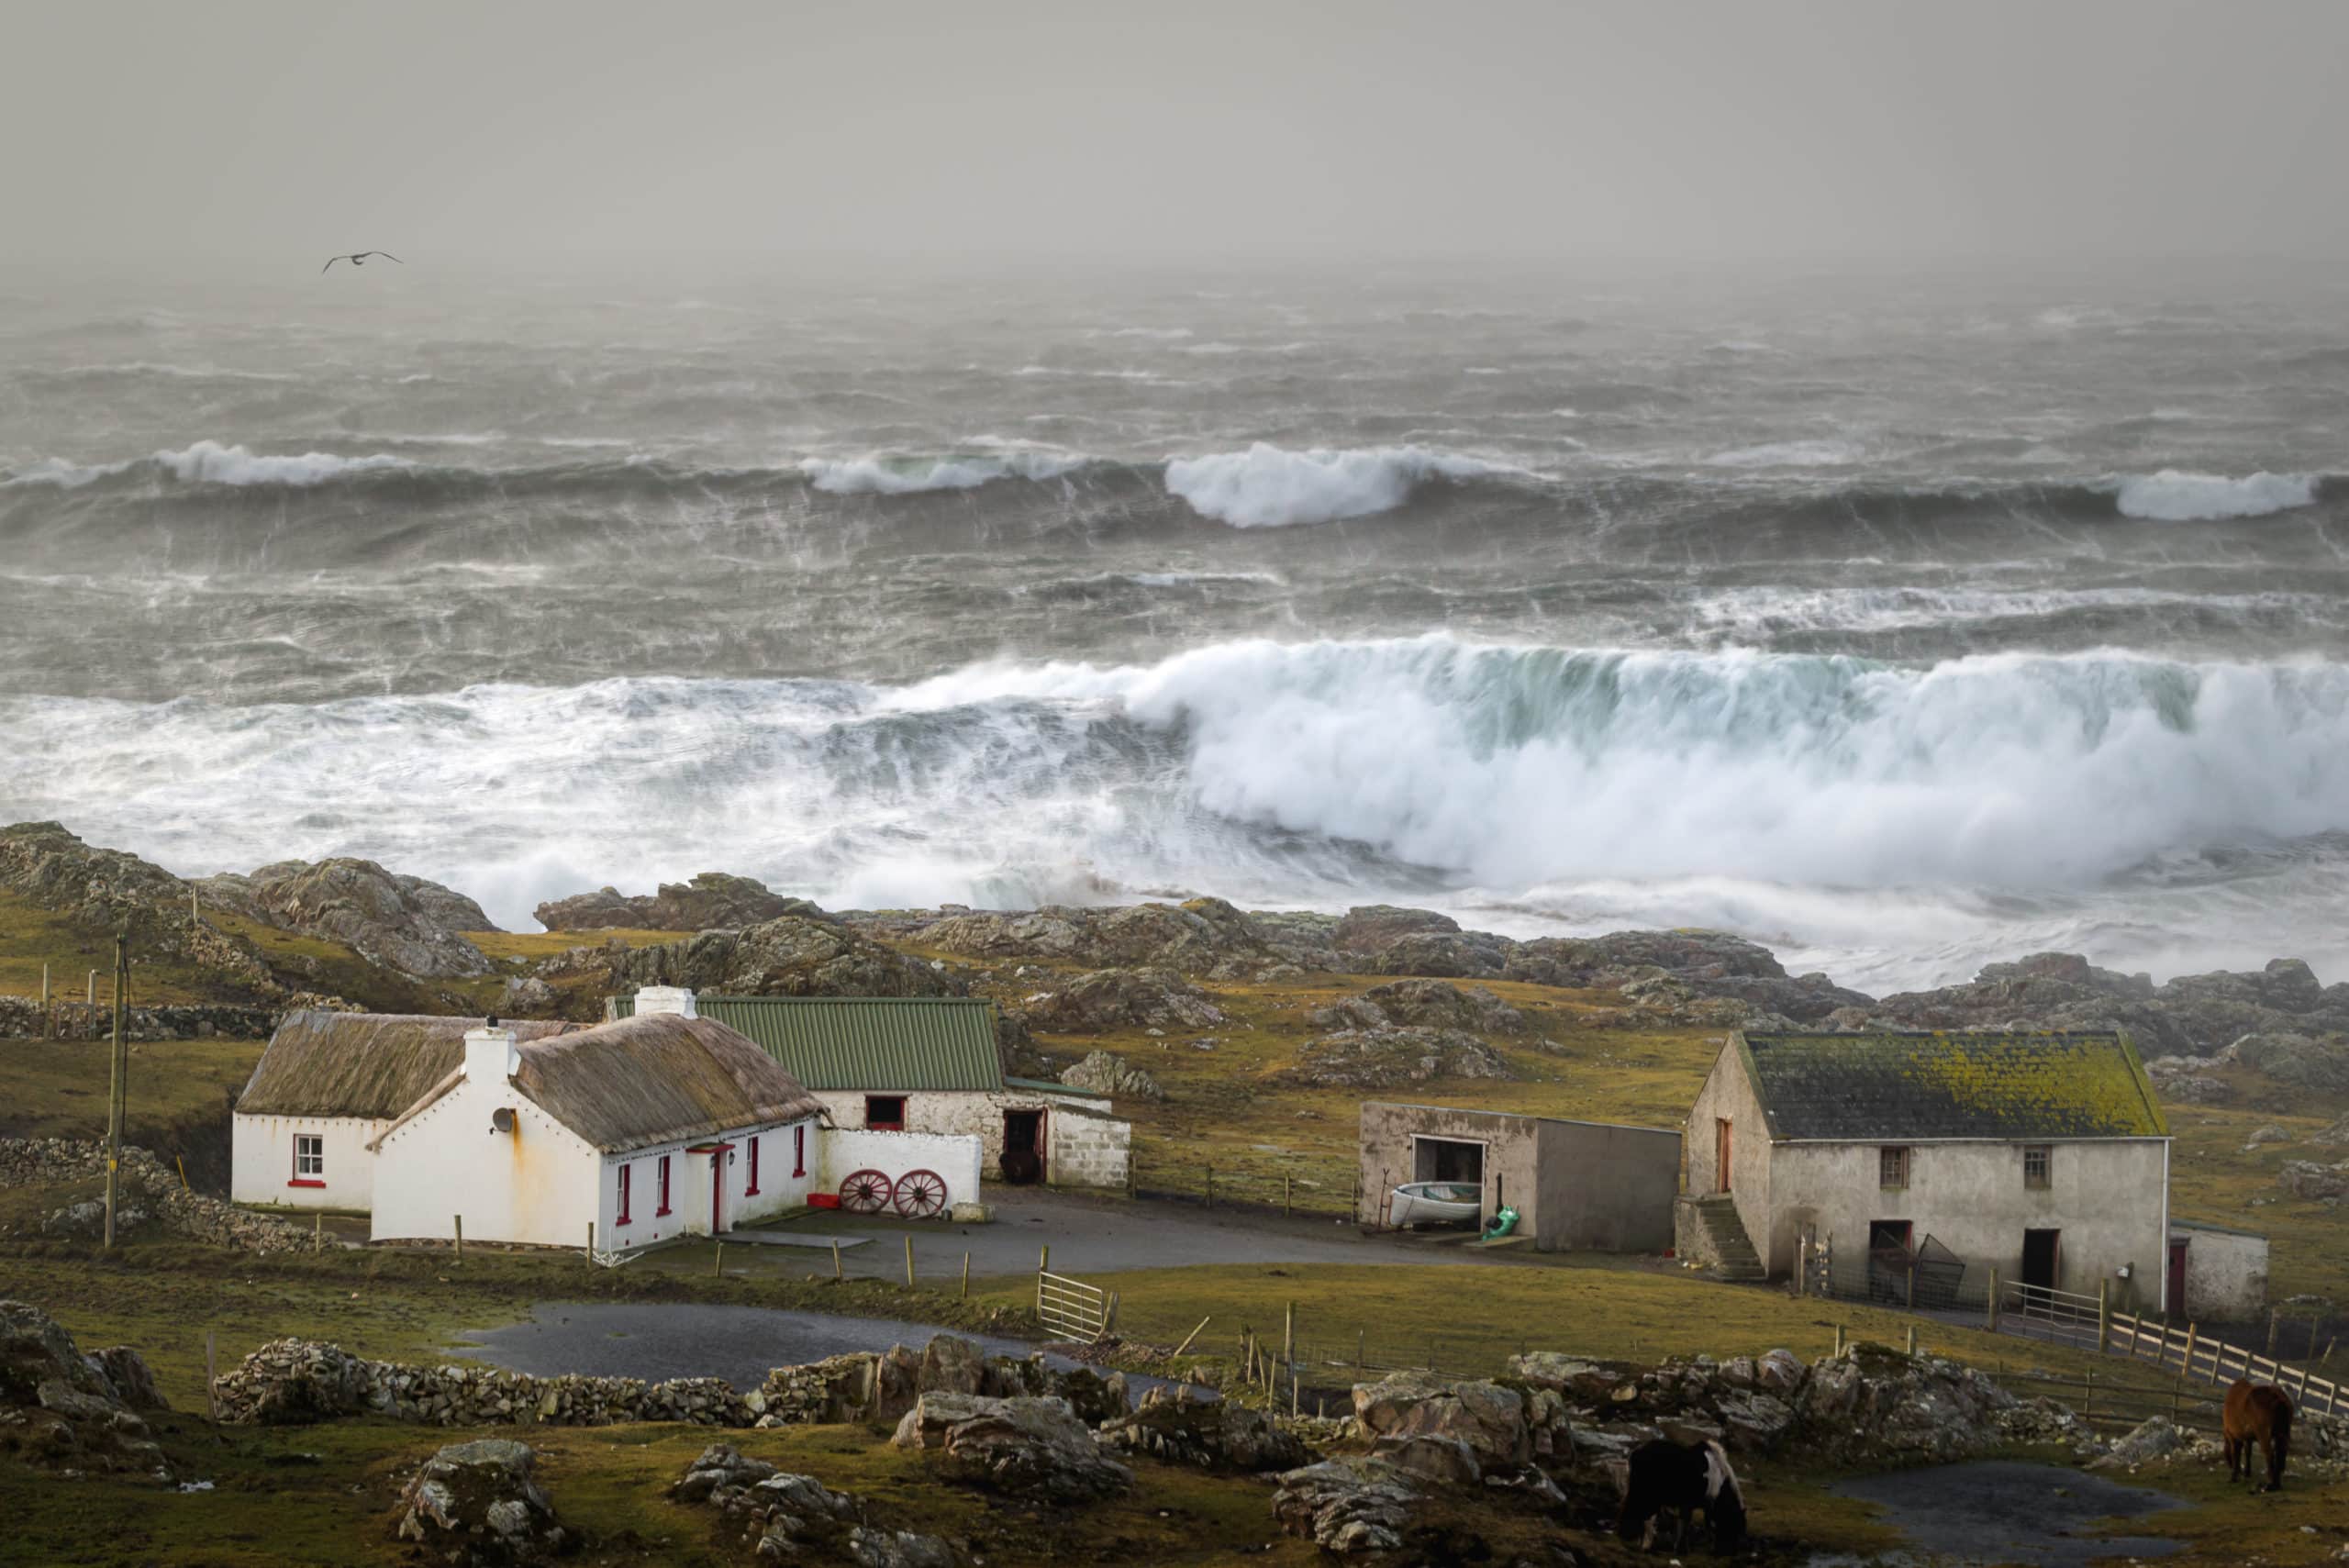 Storm Ciara and thatched cottage, Malin Head, Donegal, Ireland